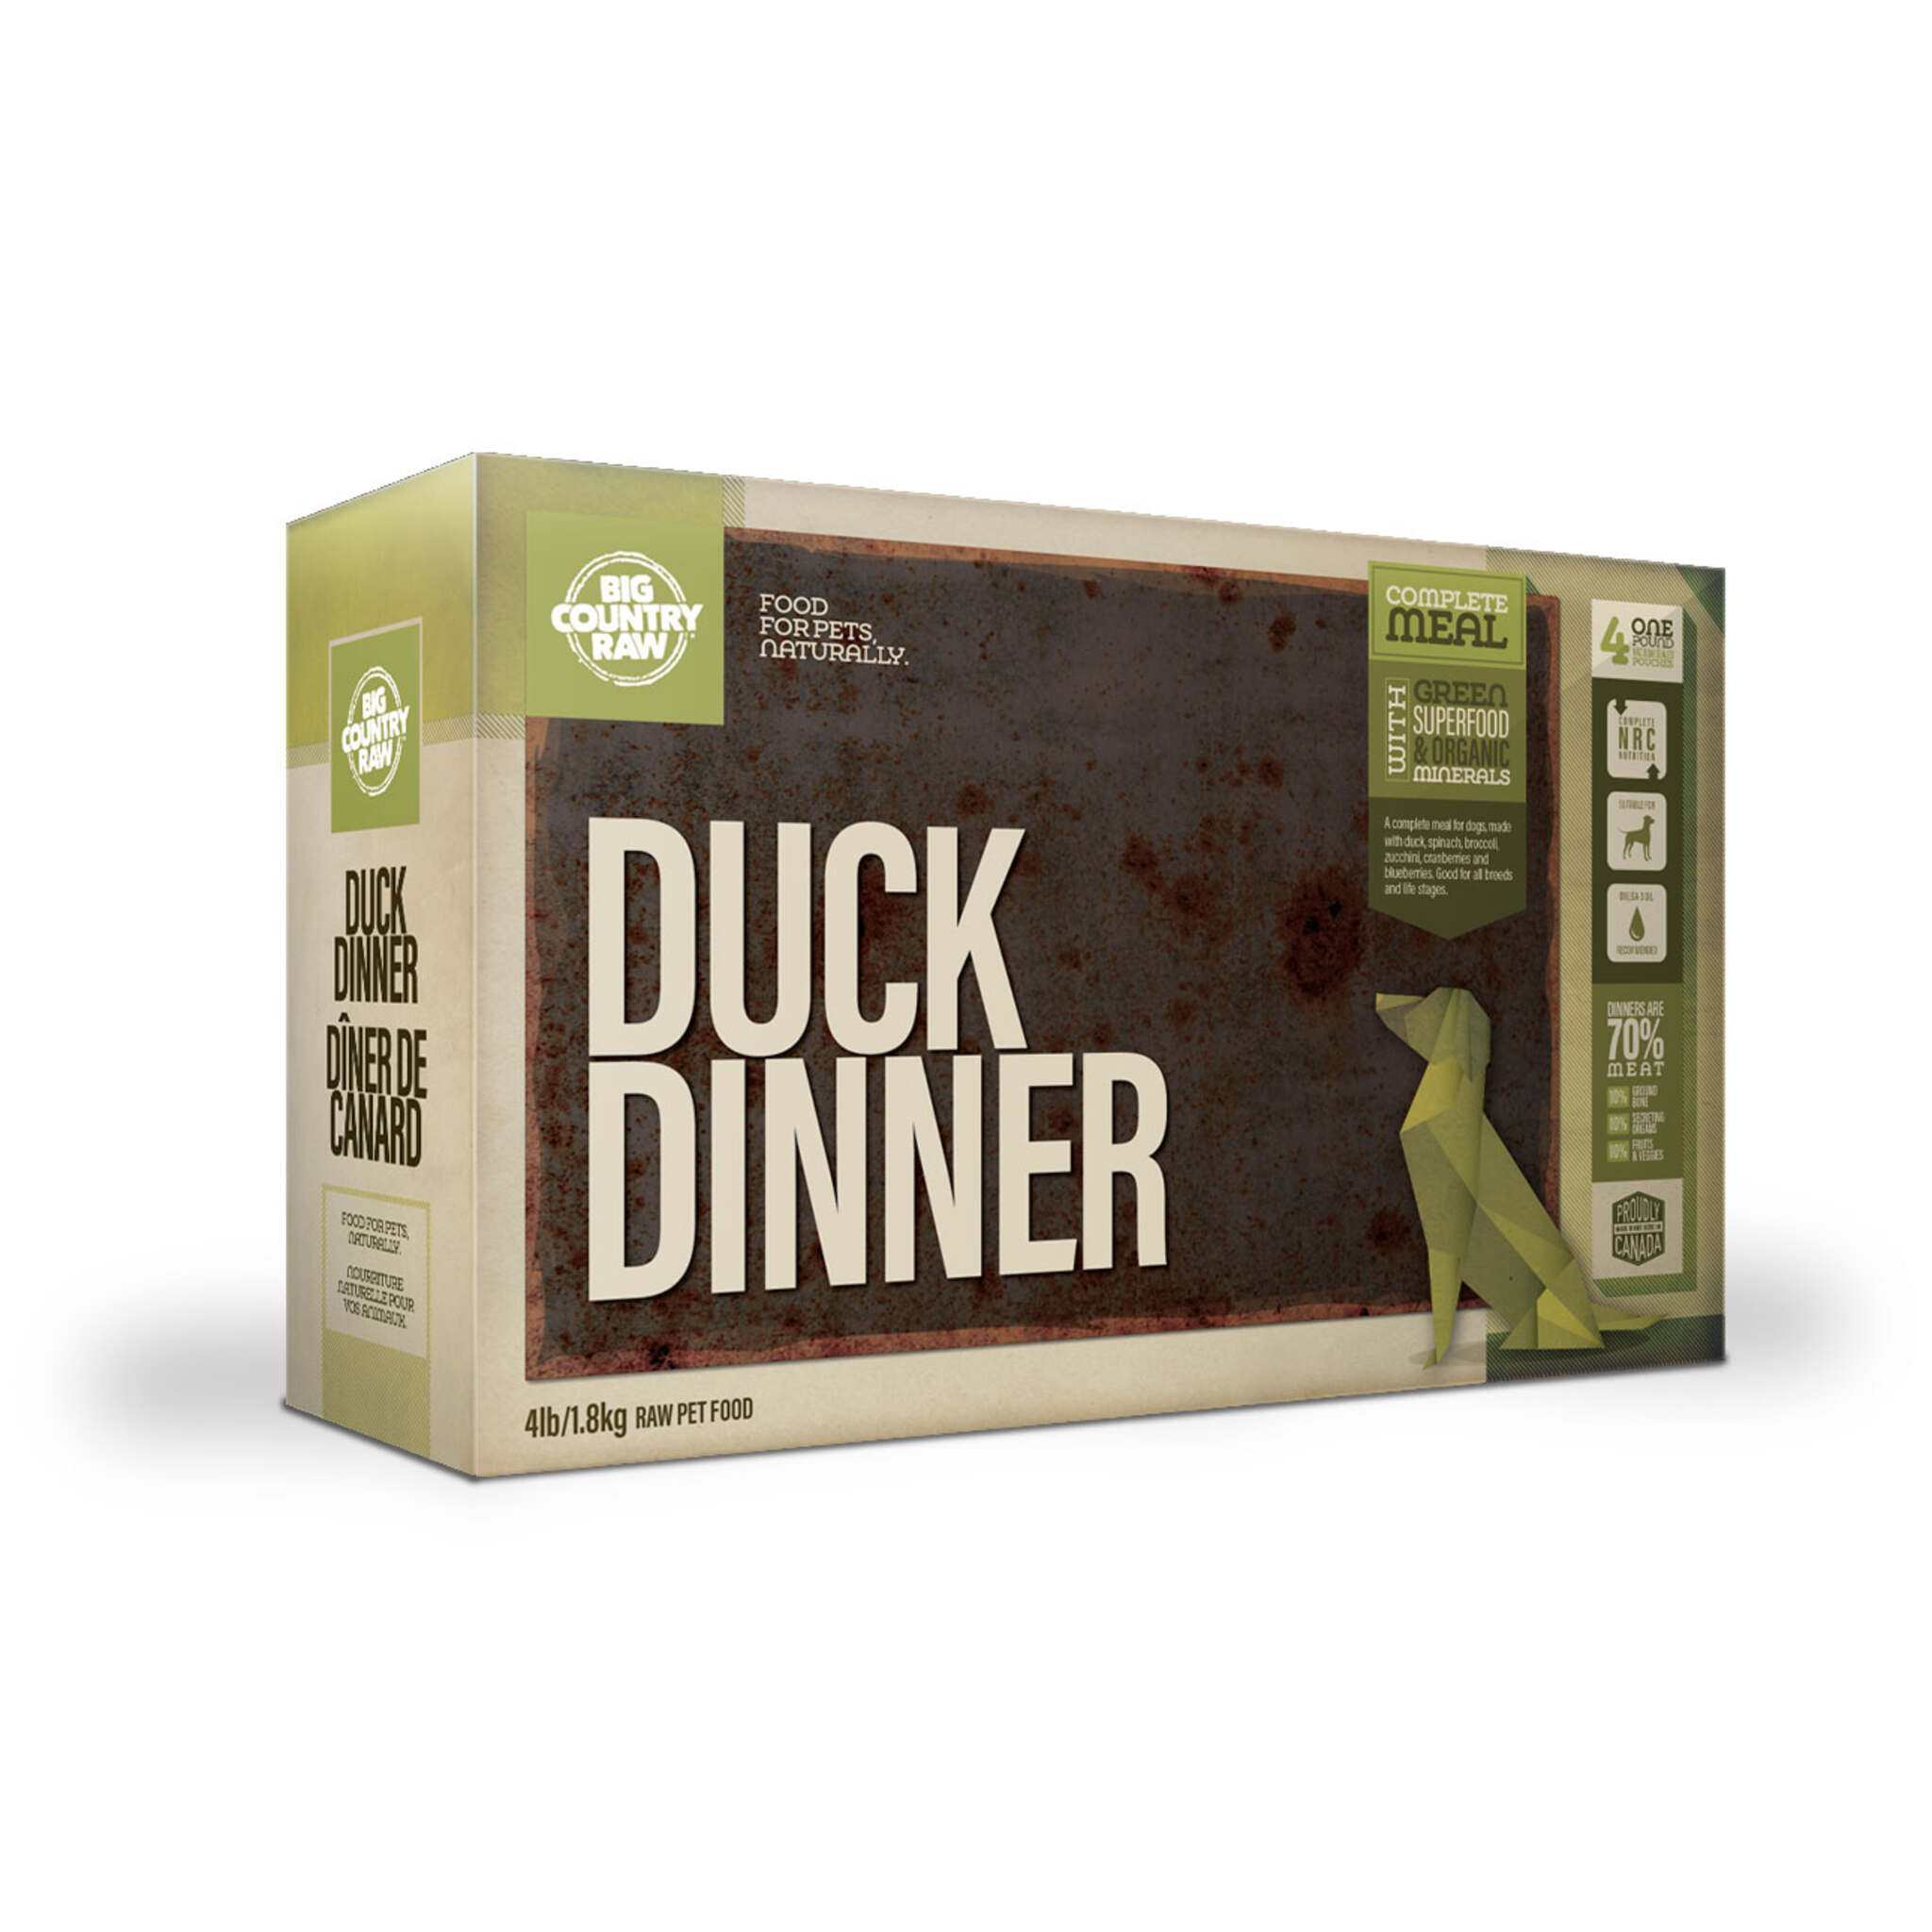 A carton of Big Country Raw dog food, Duck dinner recipe, 4 lb (contains four 1 lb patties), requires freezing.